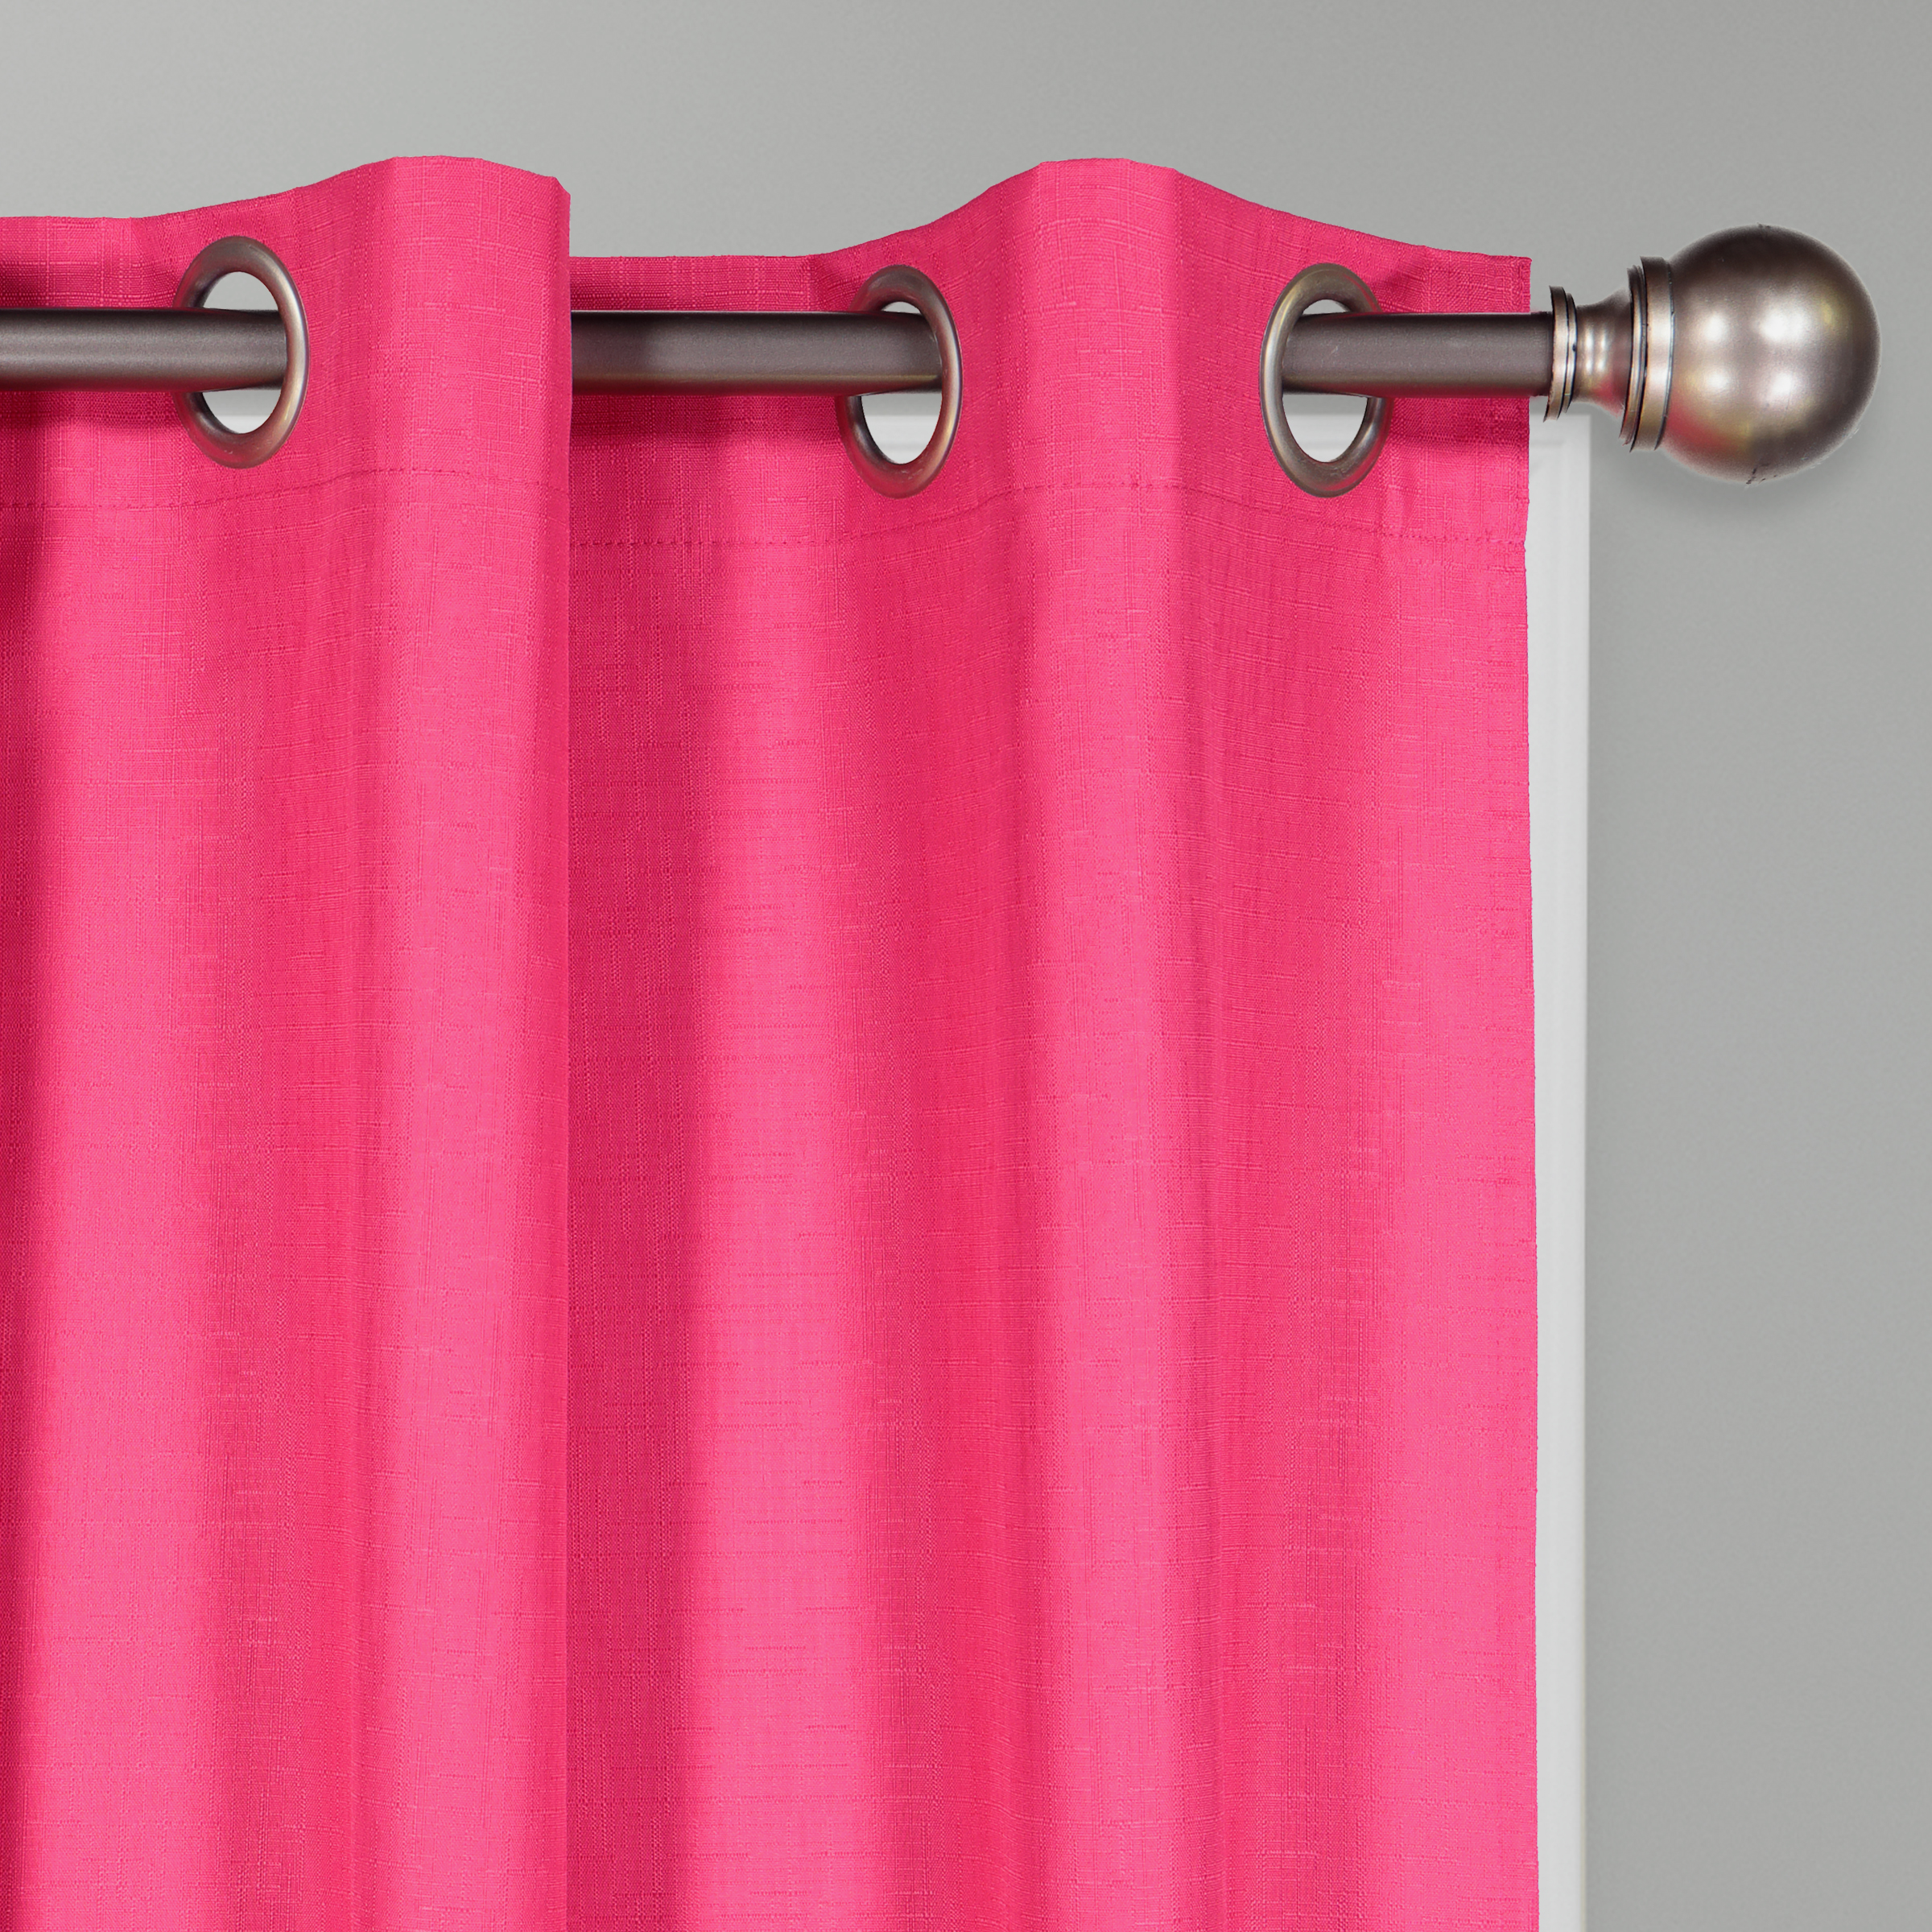 Eclipse Dayton Solid Color Blackout Grommet Single Curtain Panel, Pink, 42 x 63 - image 5 of 9